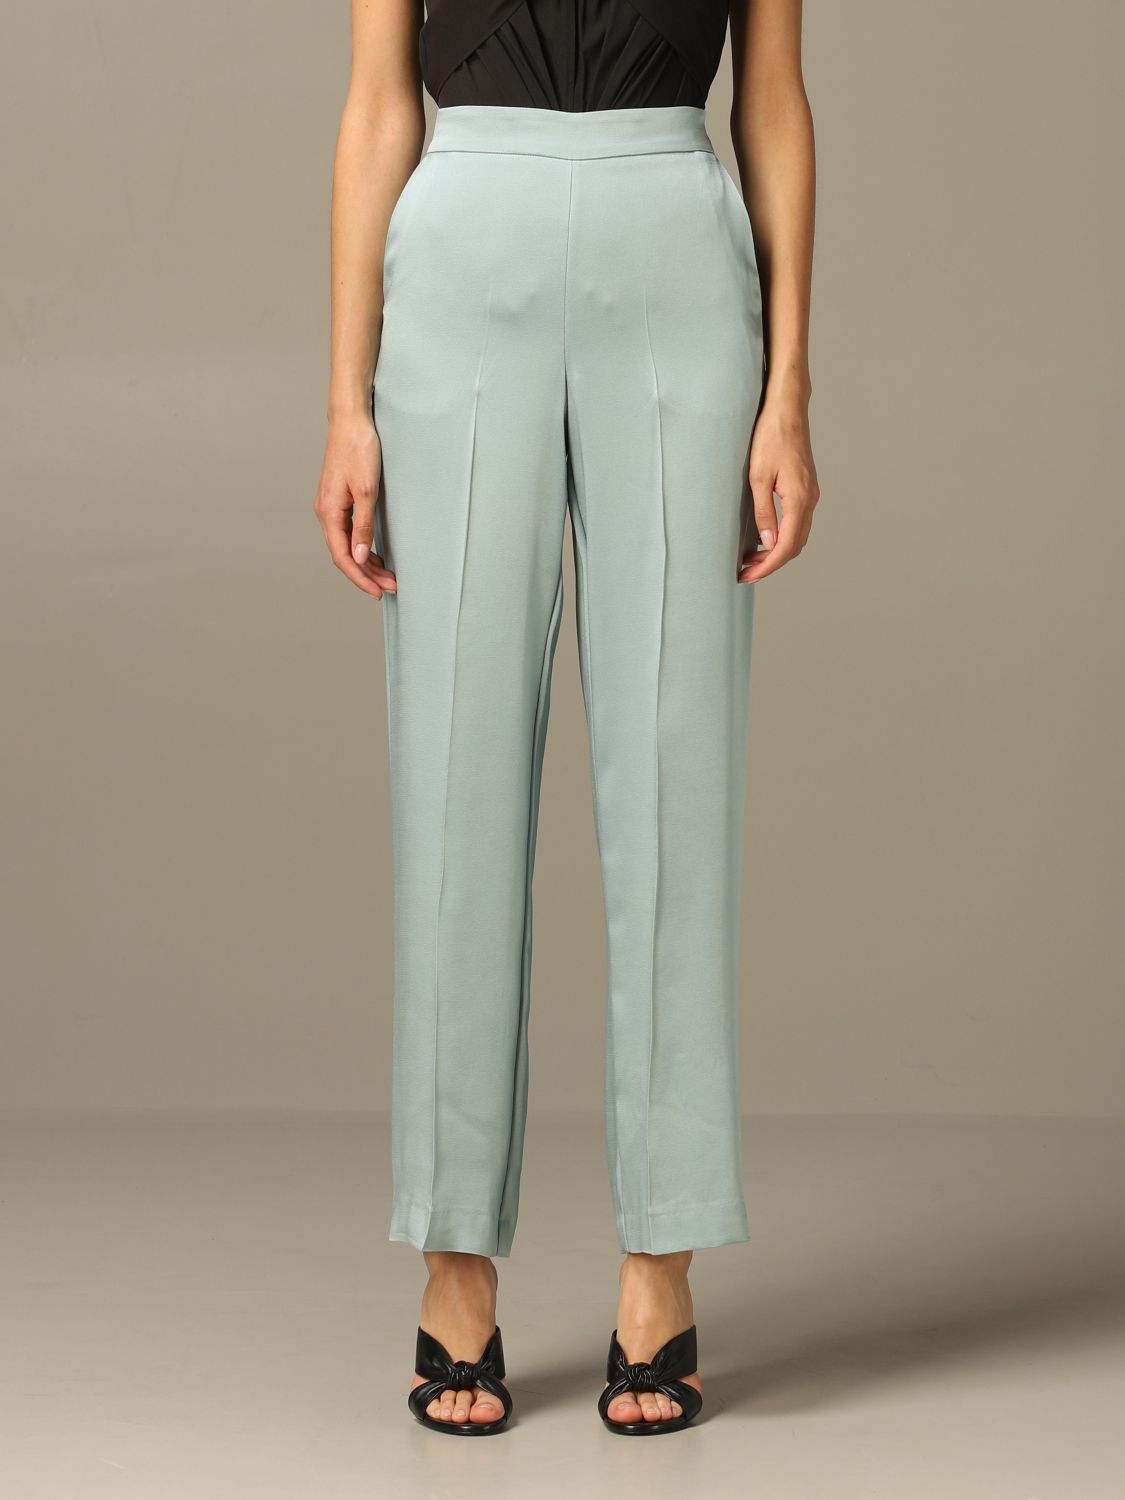 Maliparmi Outlet: high-waisted trousers - Gnawed Blue | Maliparmi pants ...